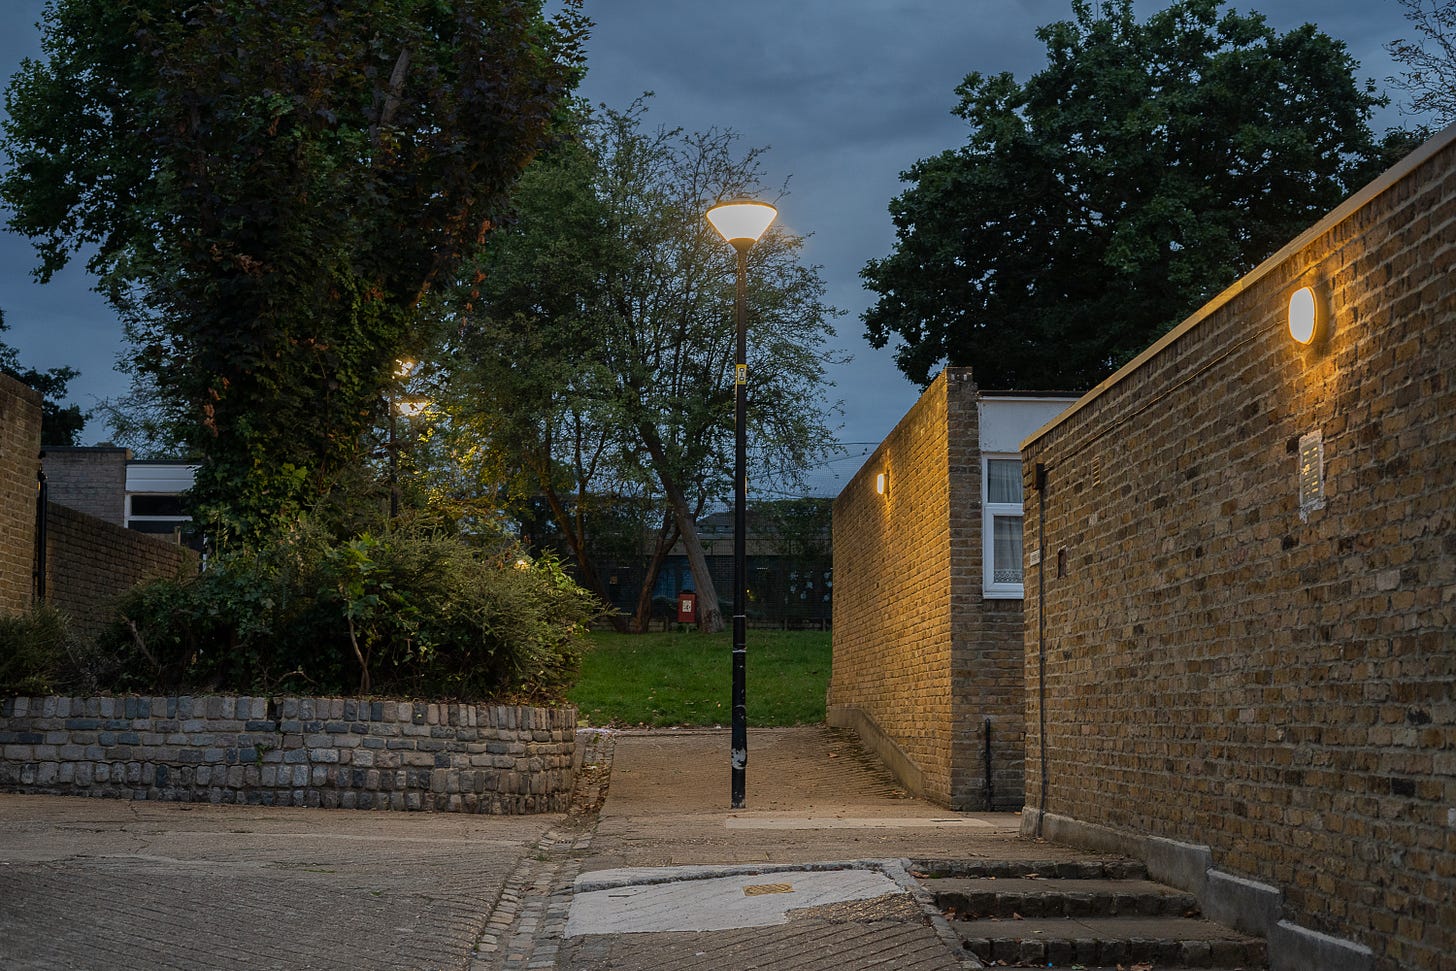 colour photo of lamppost framed by brick buildings and wall